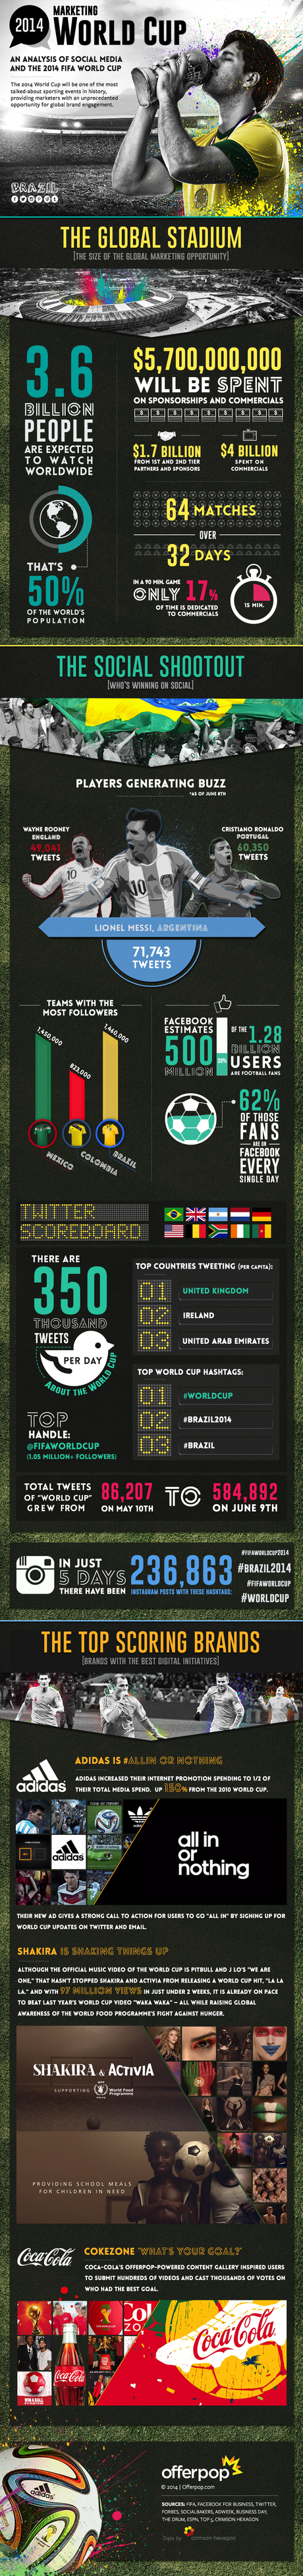 FIFA World Cup 2014 Marketing [ Infographic ]